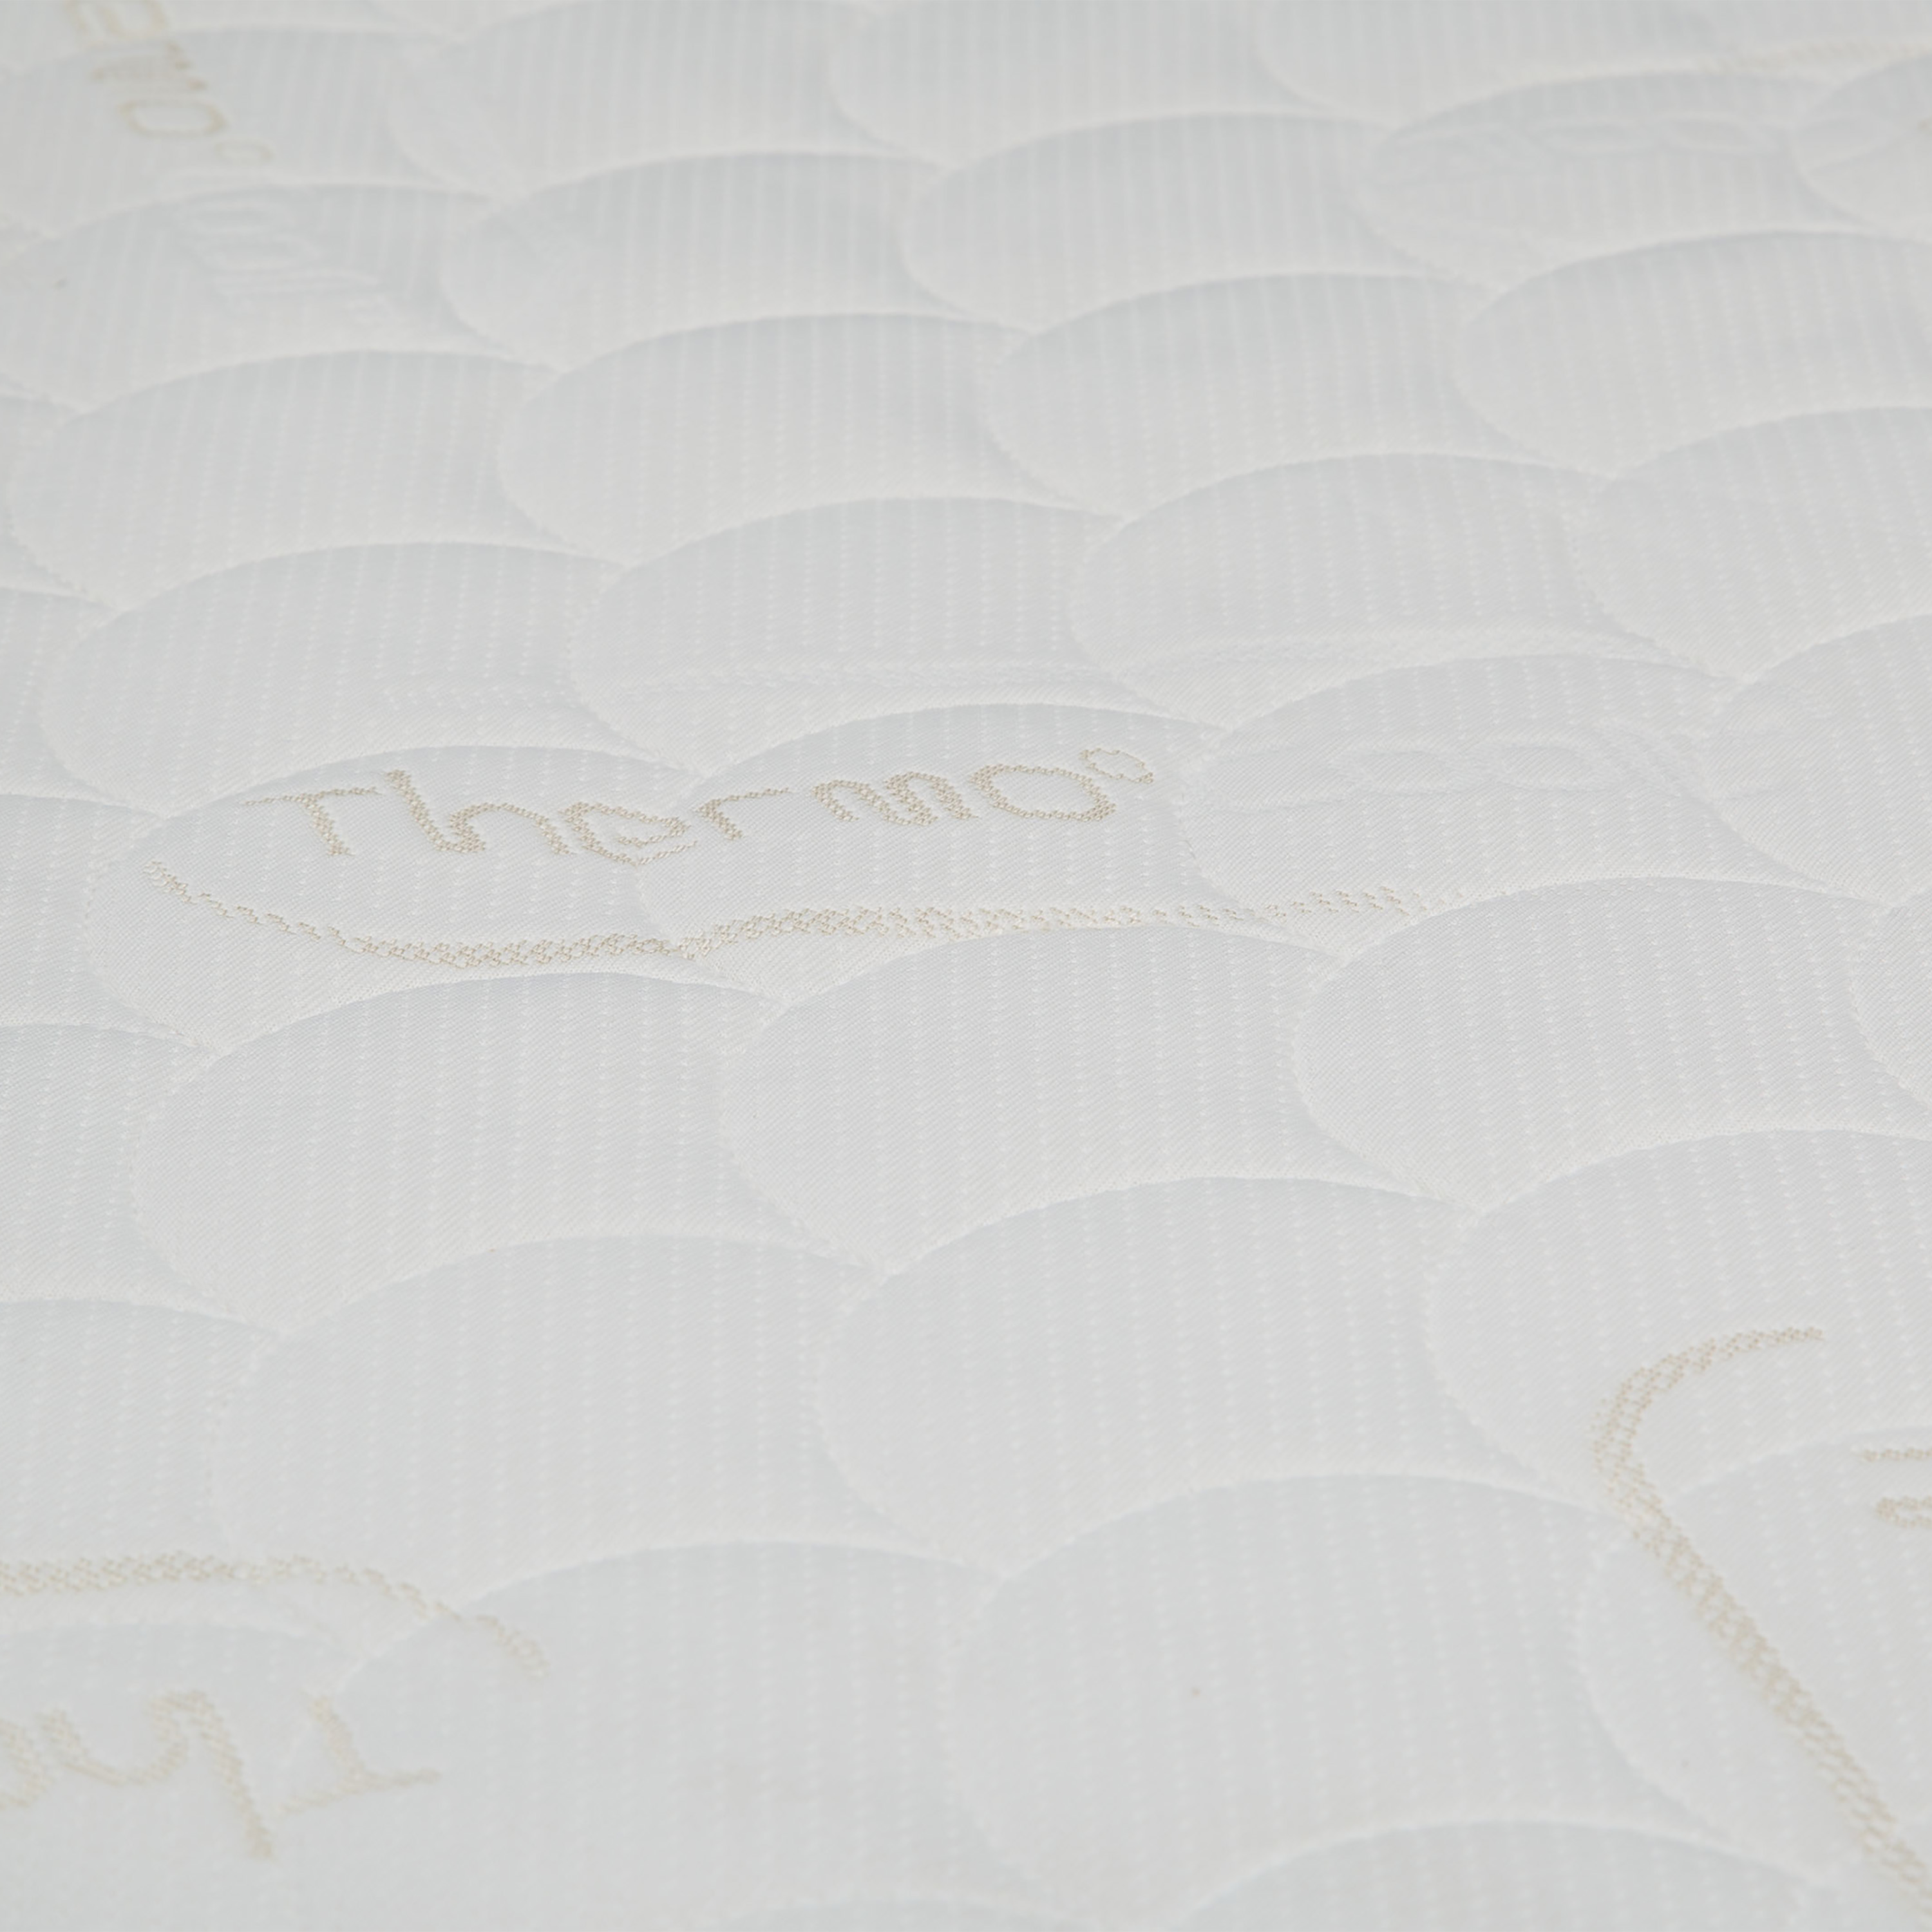 ComforPedic from Beautyrest KIDS Fitted Crib Mattress Protector - image 4 of 4